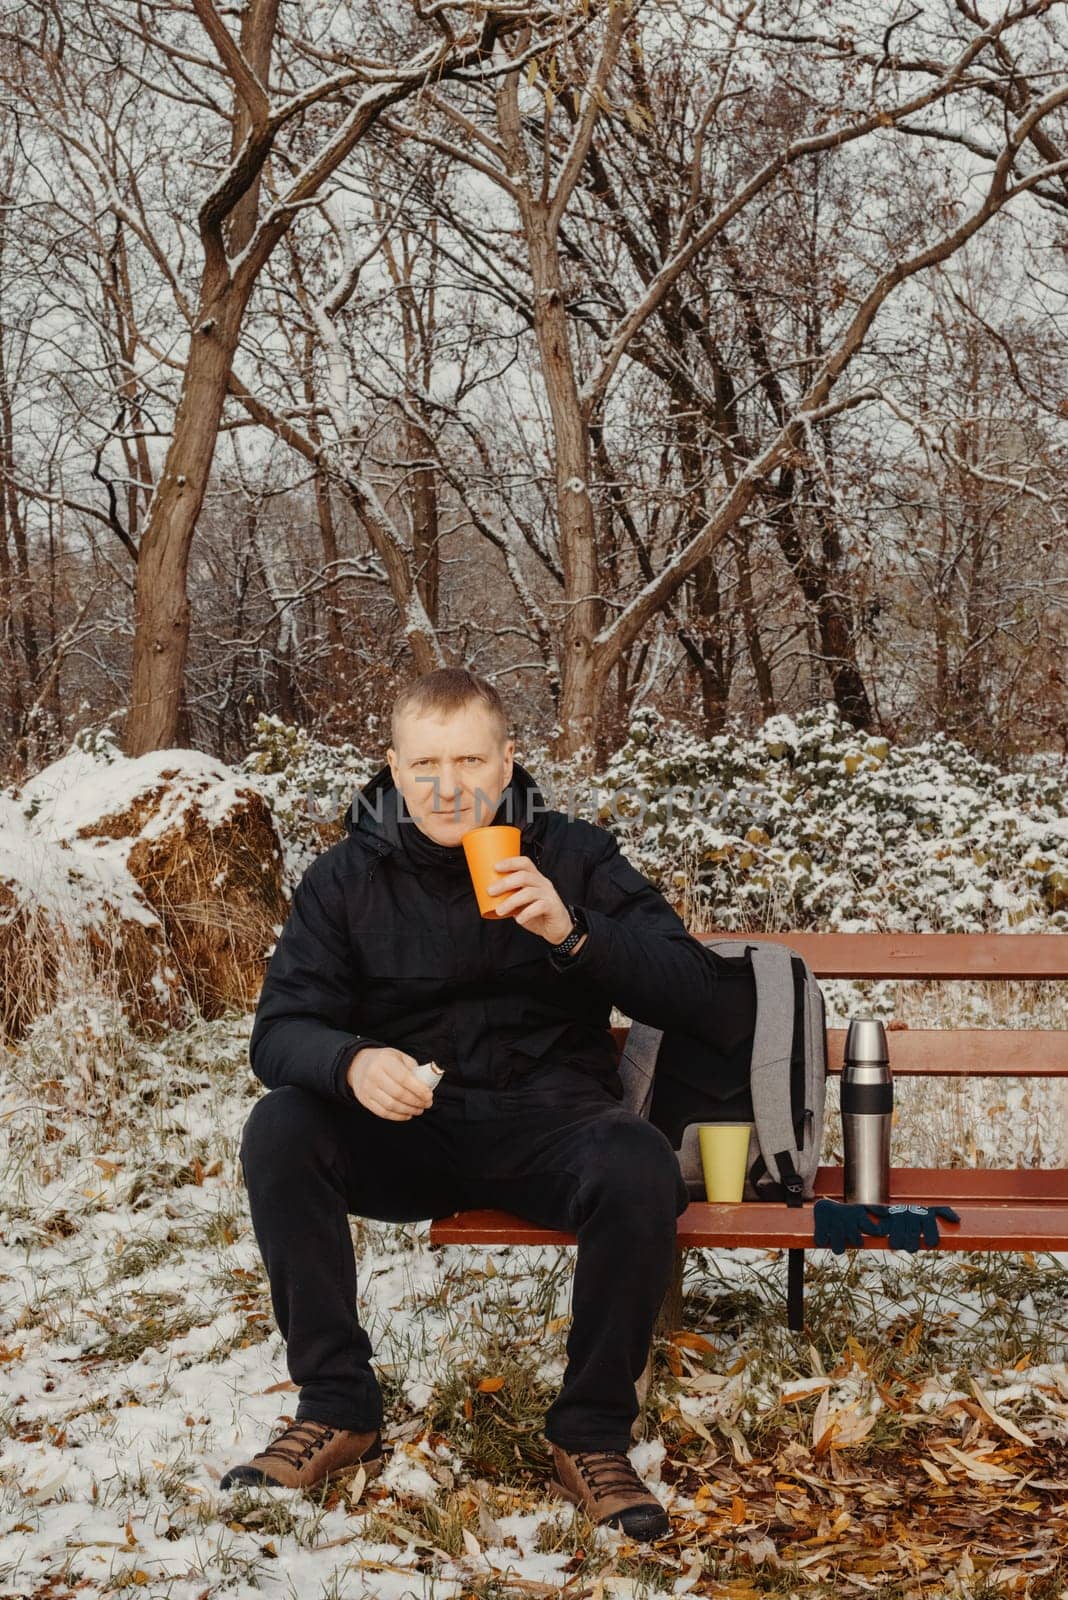 Winter Serenity: 40-Year-Old Man Enjoying Tea on Snow-Covered Bench in Rural Park. Immerse yourself in the tranquil beauty of winter as a 40-year-old man finds solace on a snowy bench in a rural park. by Andrii_Ko